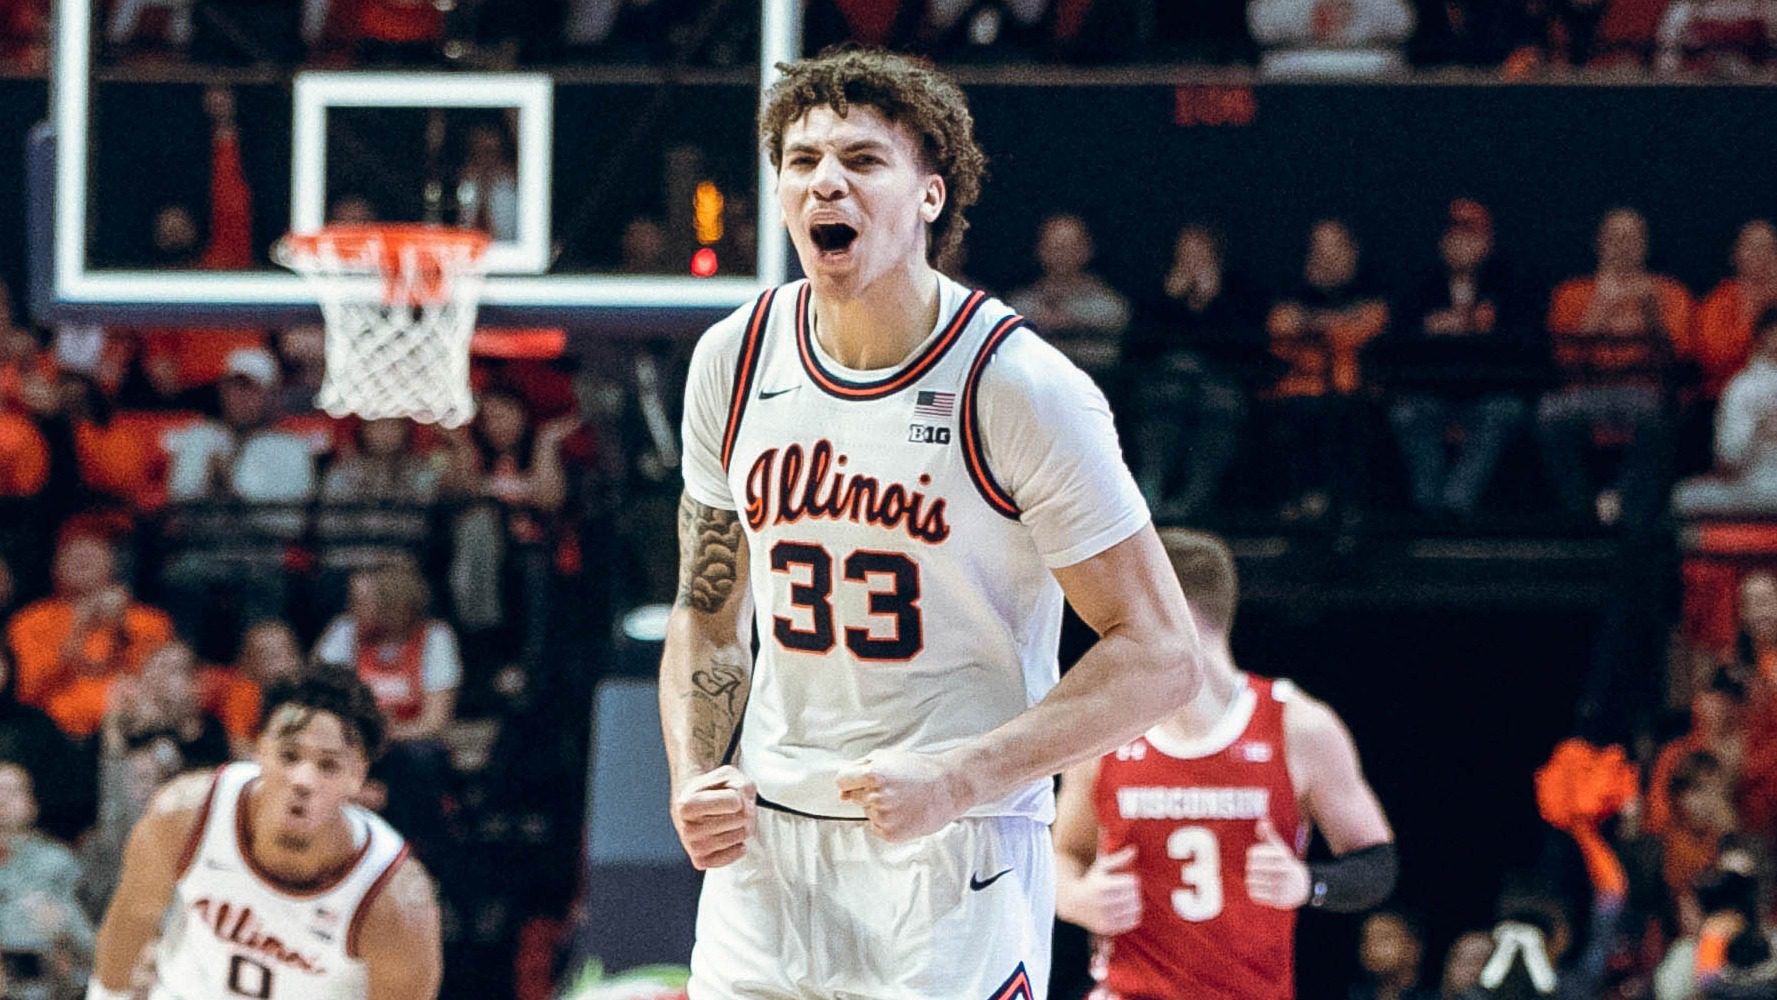 Illinois' Coleman Hawkins to declare for NBA Draft, maintain college